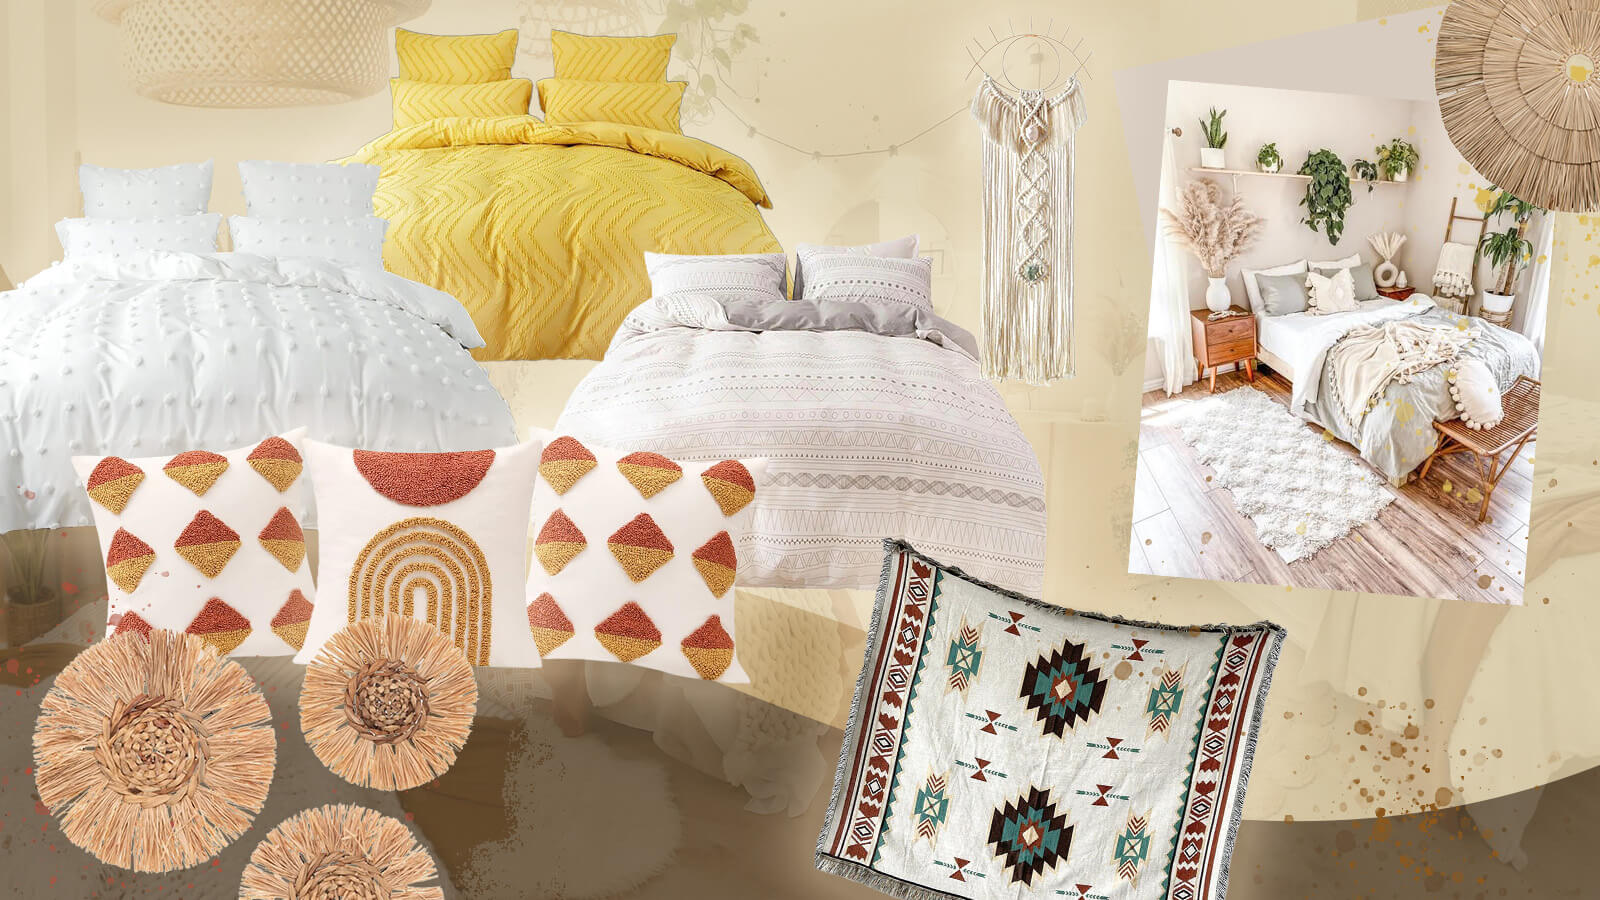 boho aesthetic bedding and textiles